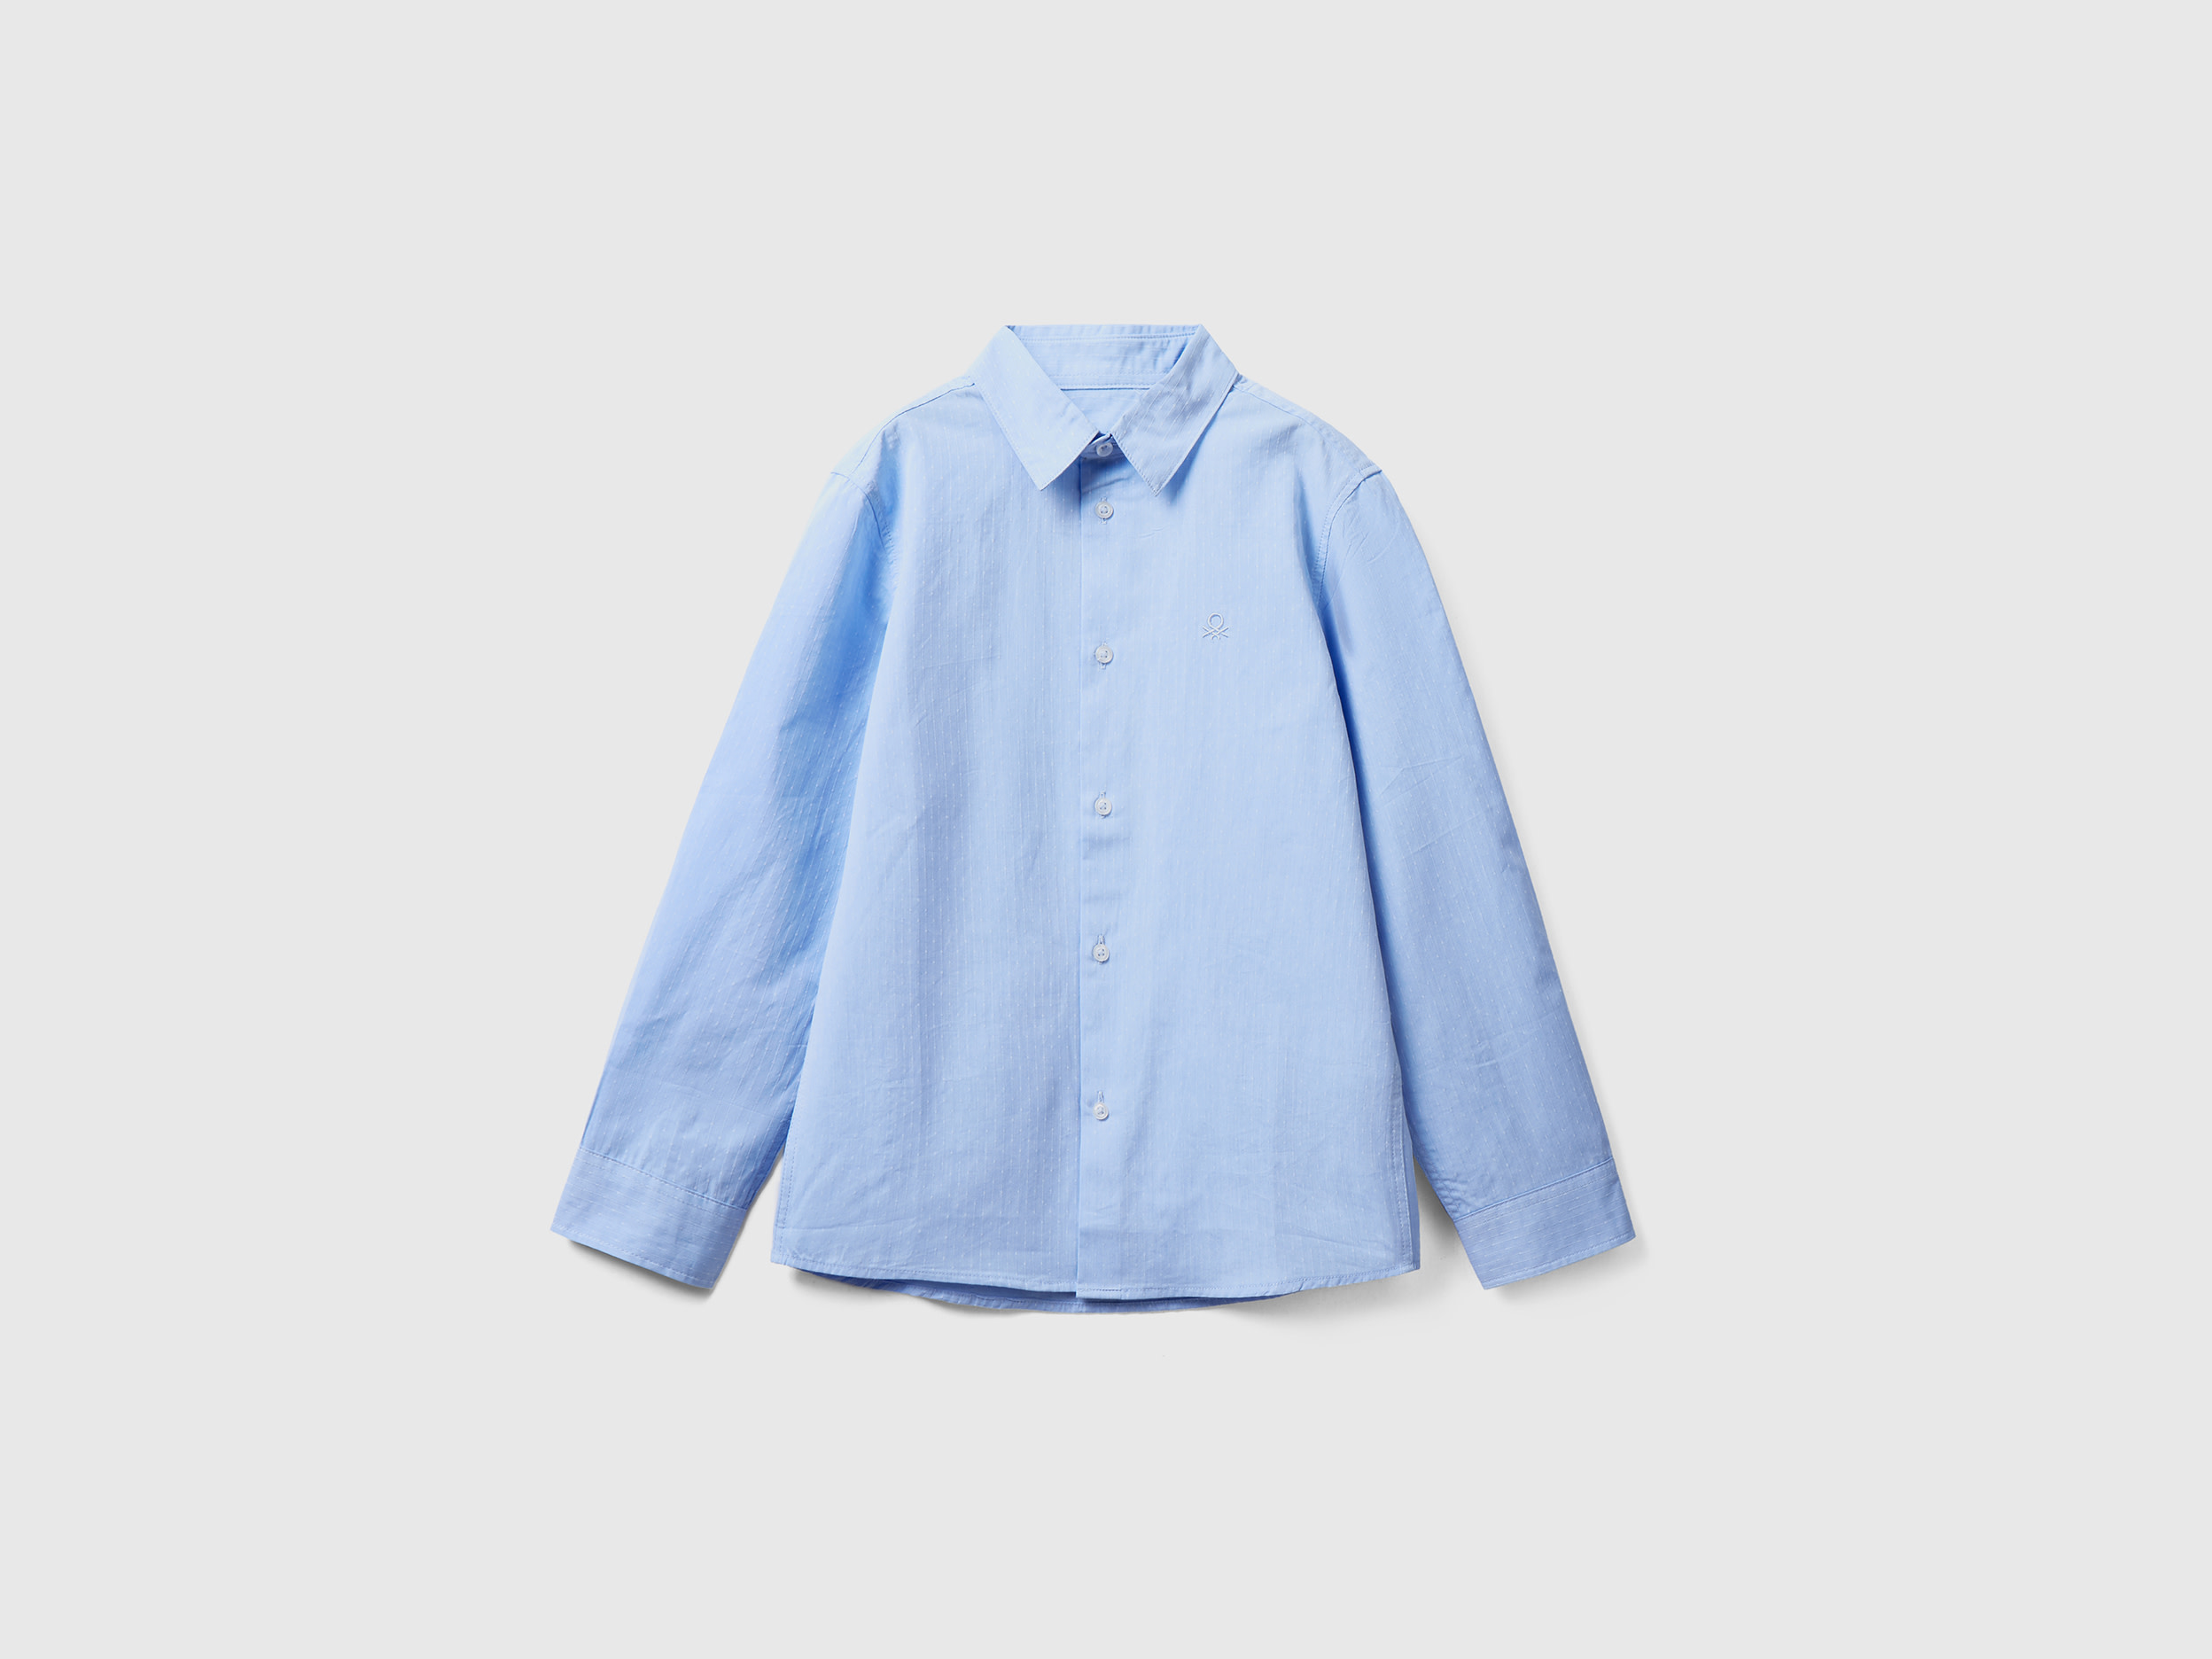 Benetton, Classic Shirt In Pure Cotton, size S, Sky Blue, Kids